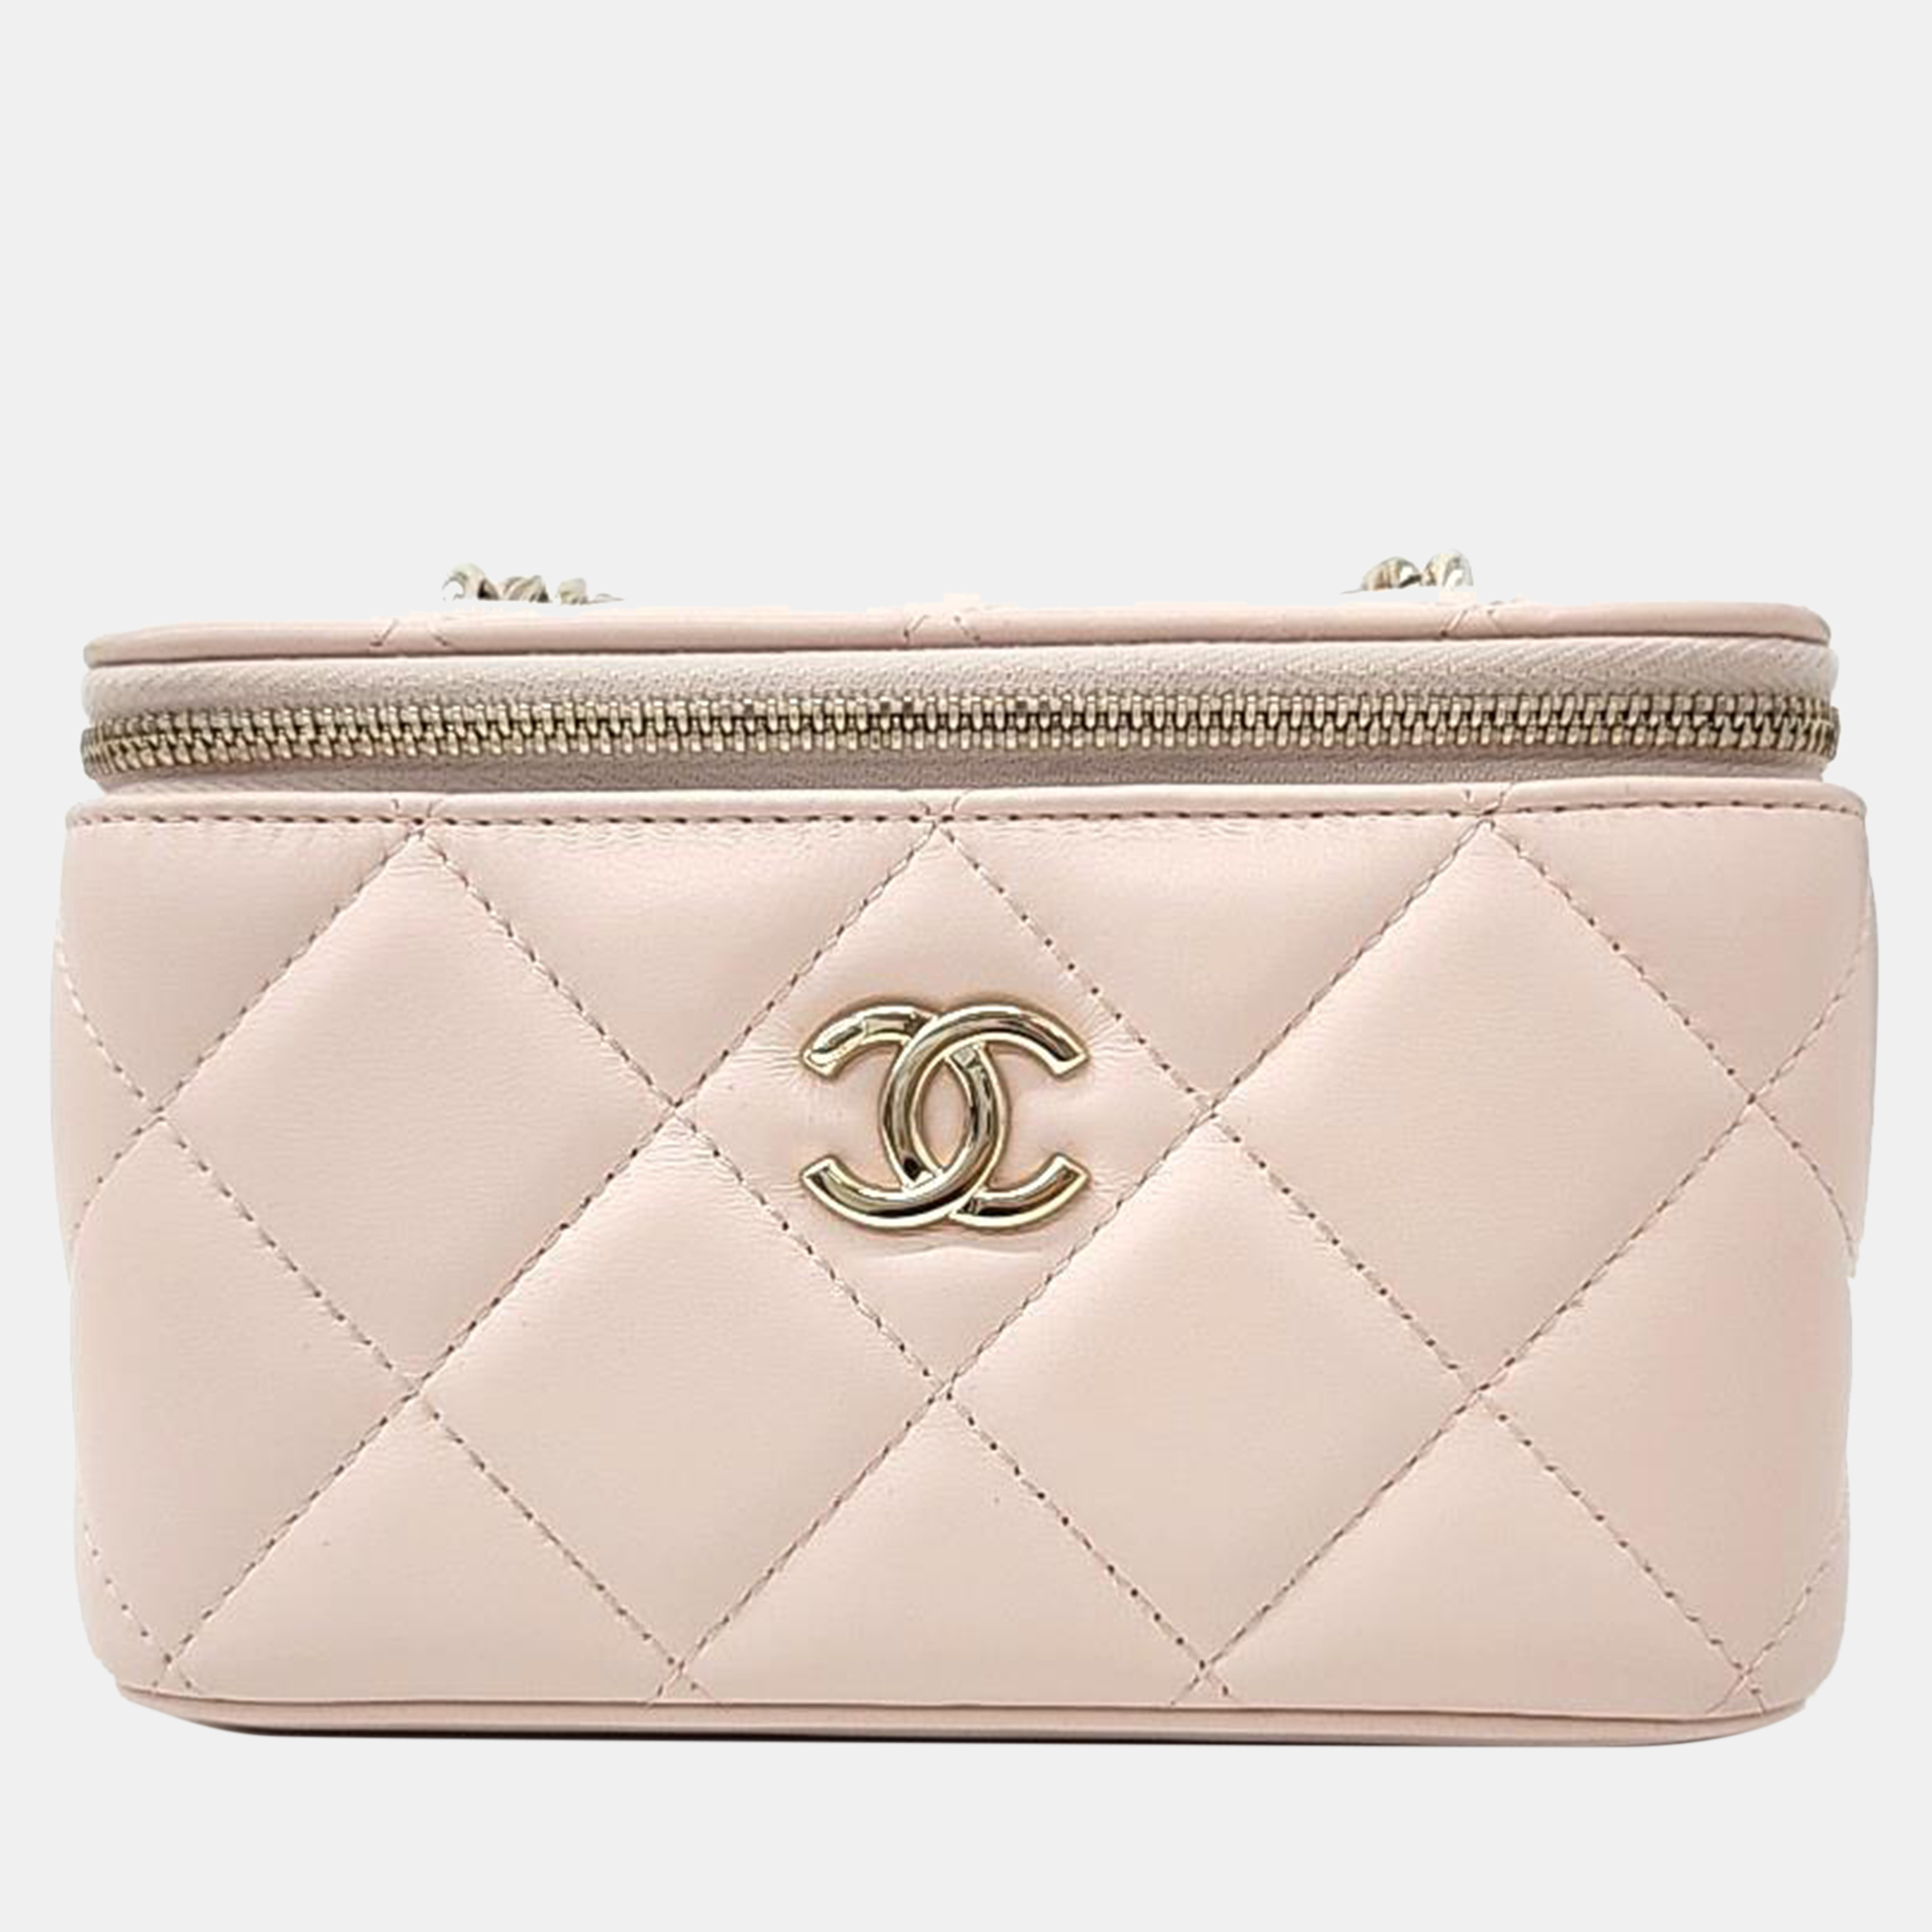 Chanel pink leather small vanity crossbody bag